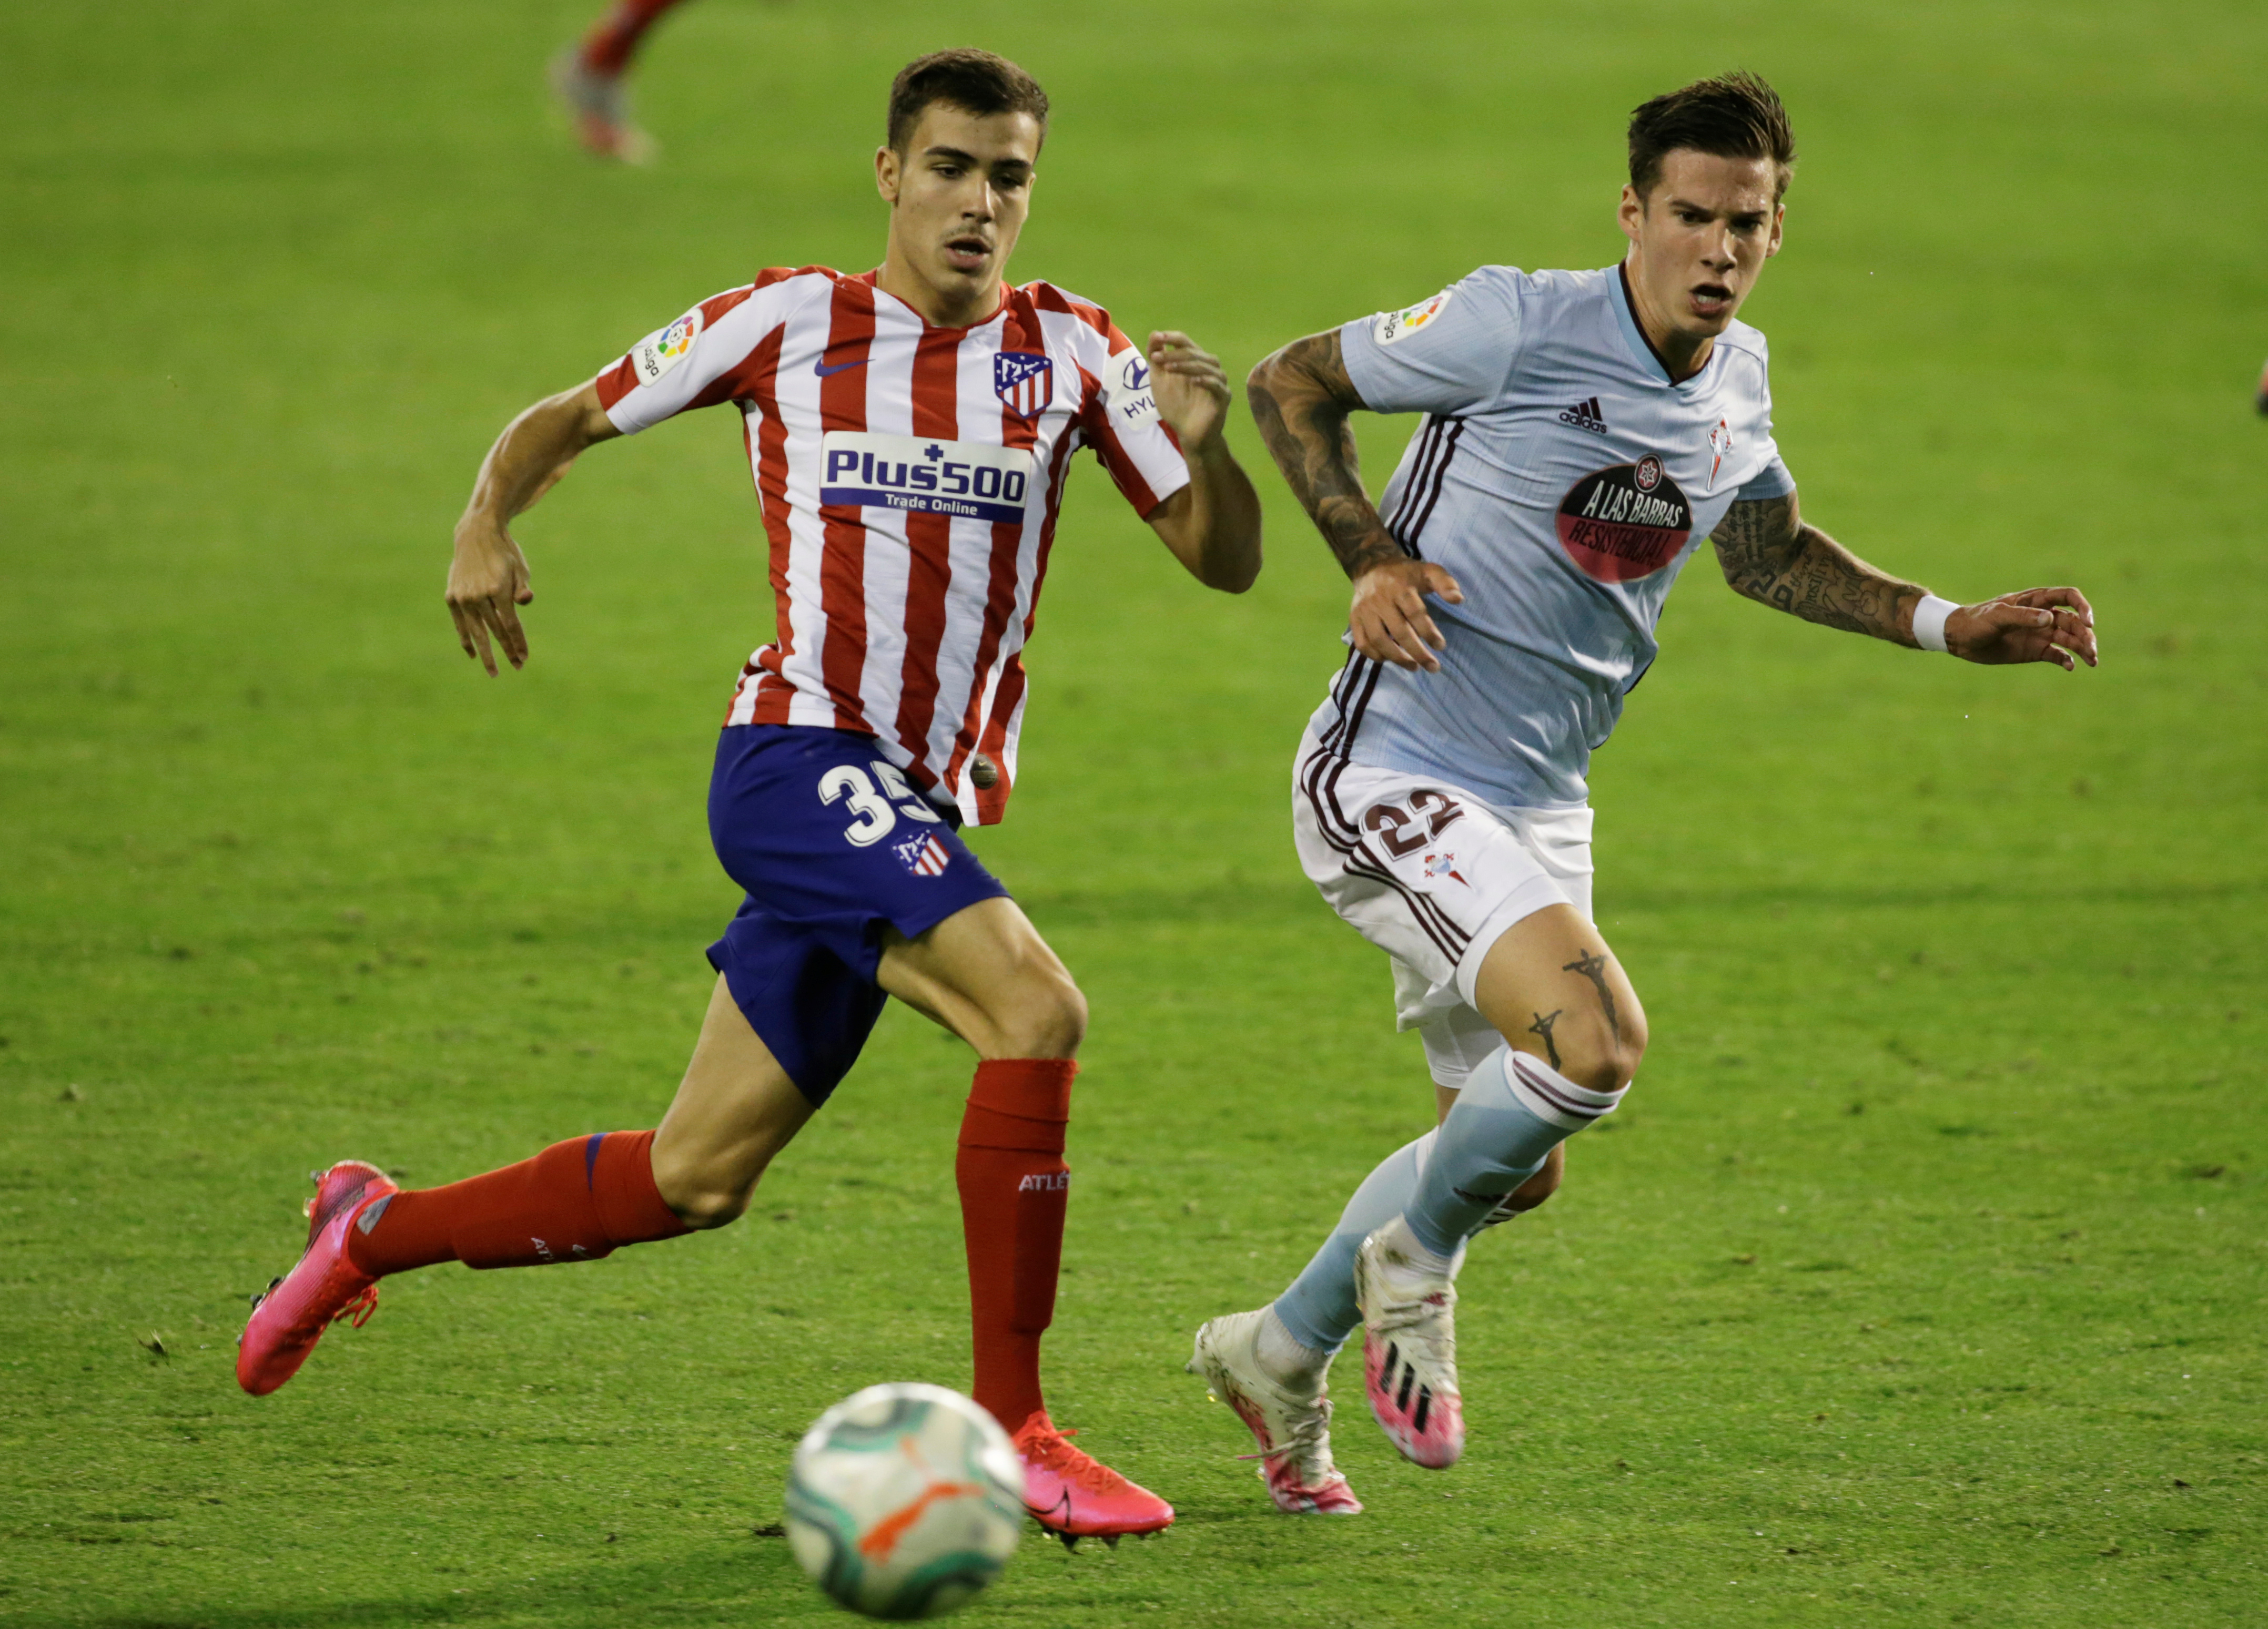 Atletico Madrid's Manu Sanchez in action with Celta Vigo's Santi Mina, as play resumes behind closed doors following the outbreak of the coronavirus disease (COVID-19). Photo: Reuters  